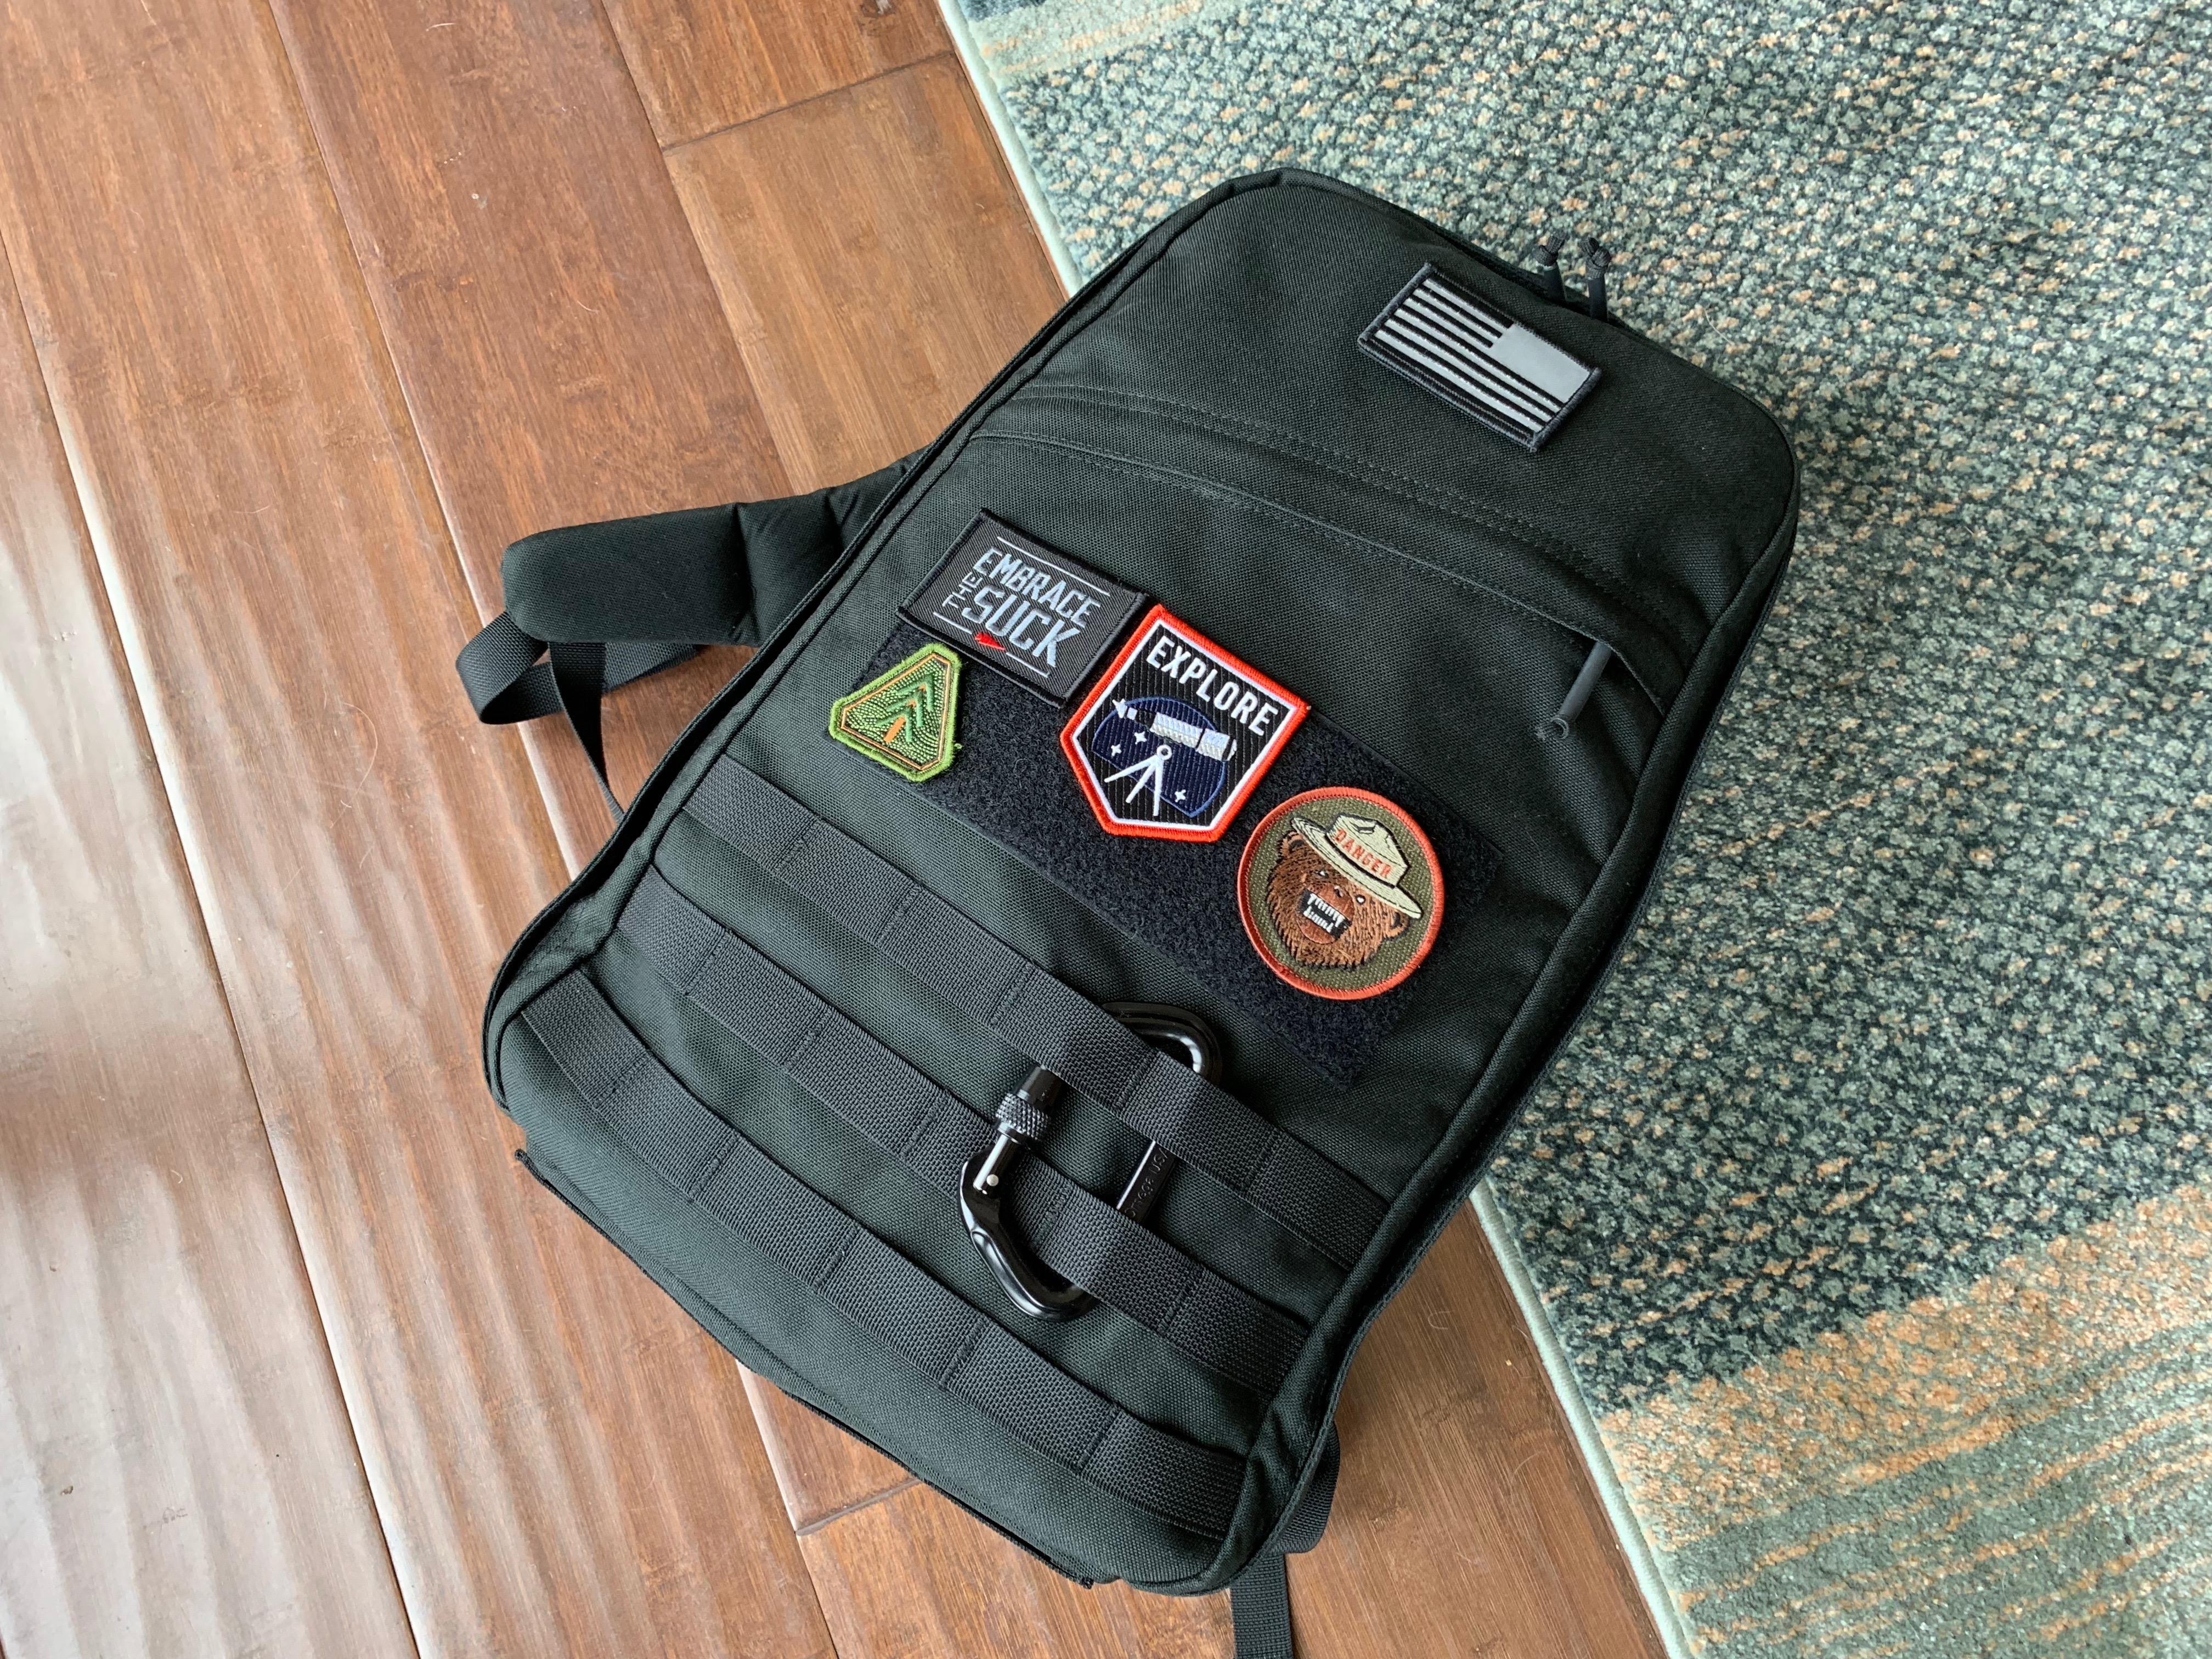 GORUCK GR1 Workshop and Tough Bag – The Brooks Review